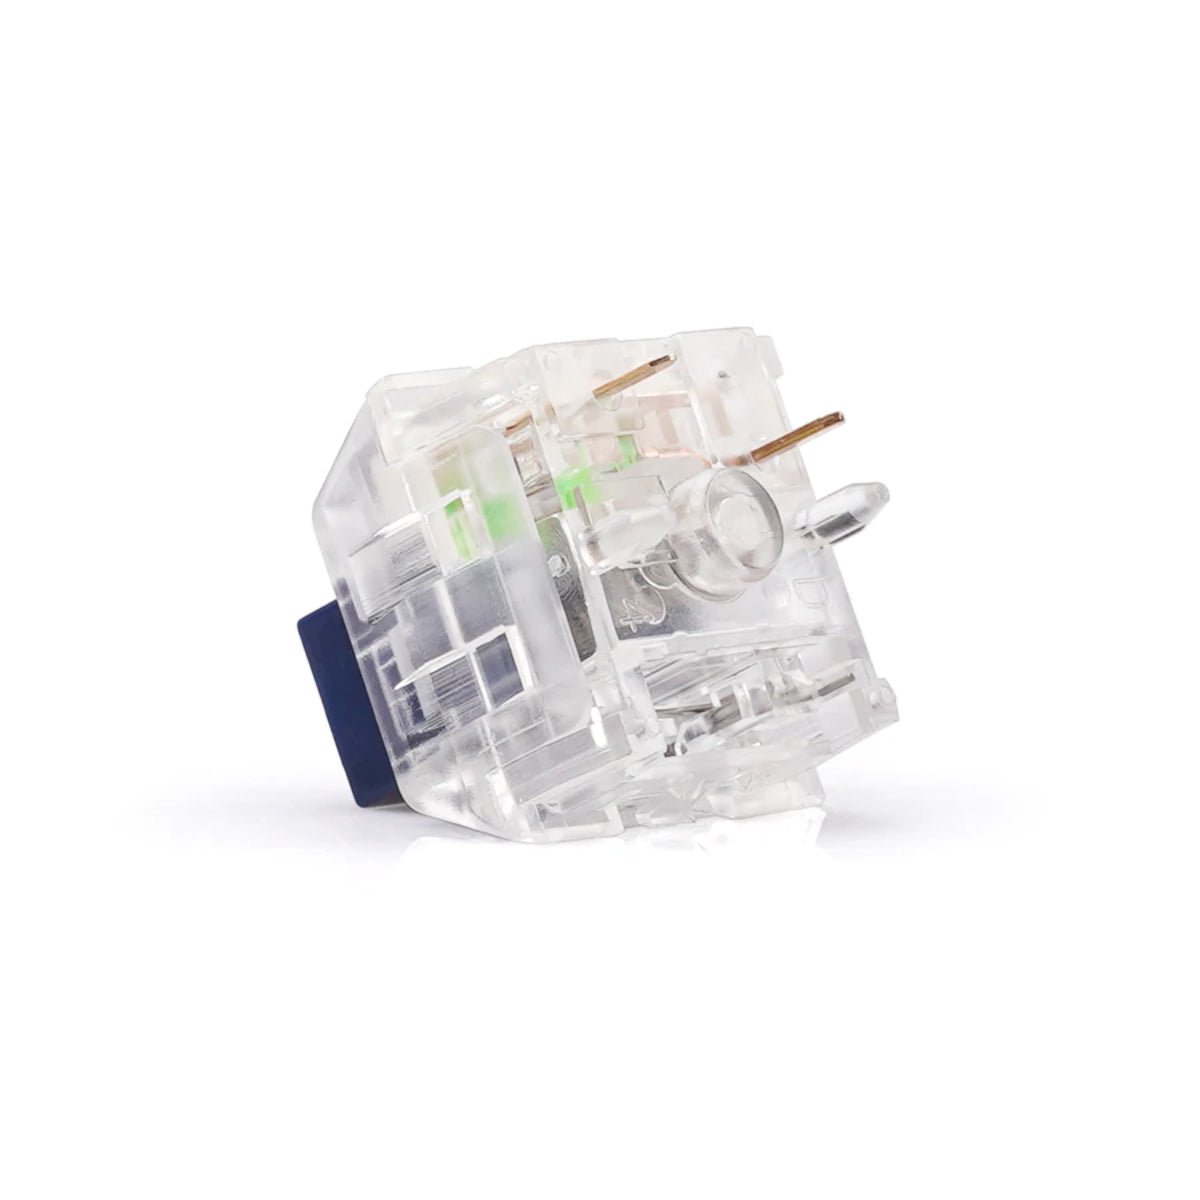 KBD Fans Kailh Box Crystal Switches - Navy - Store 974 | ستور ٩٧٤